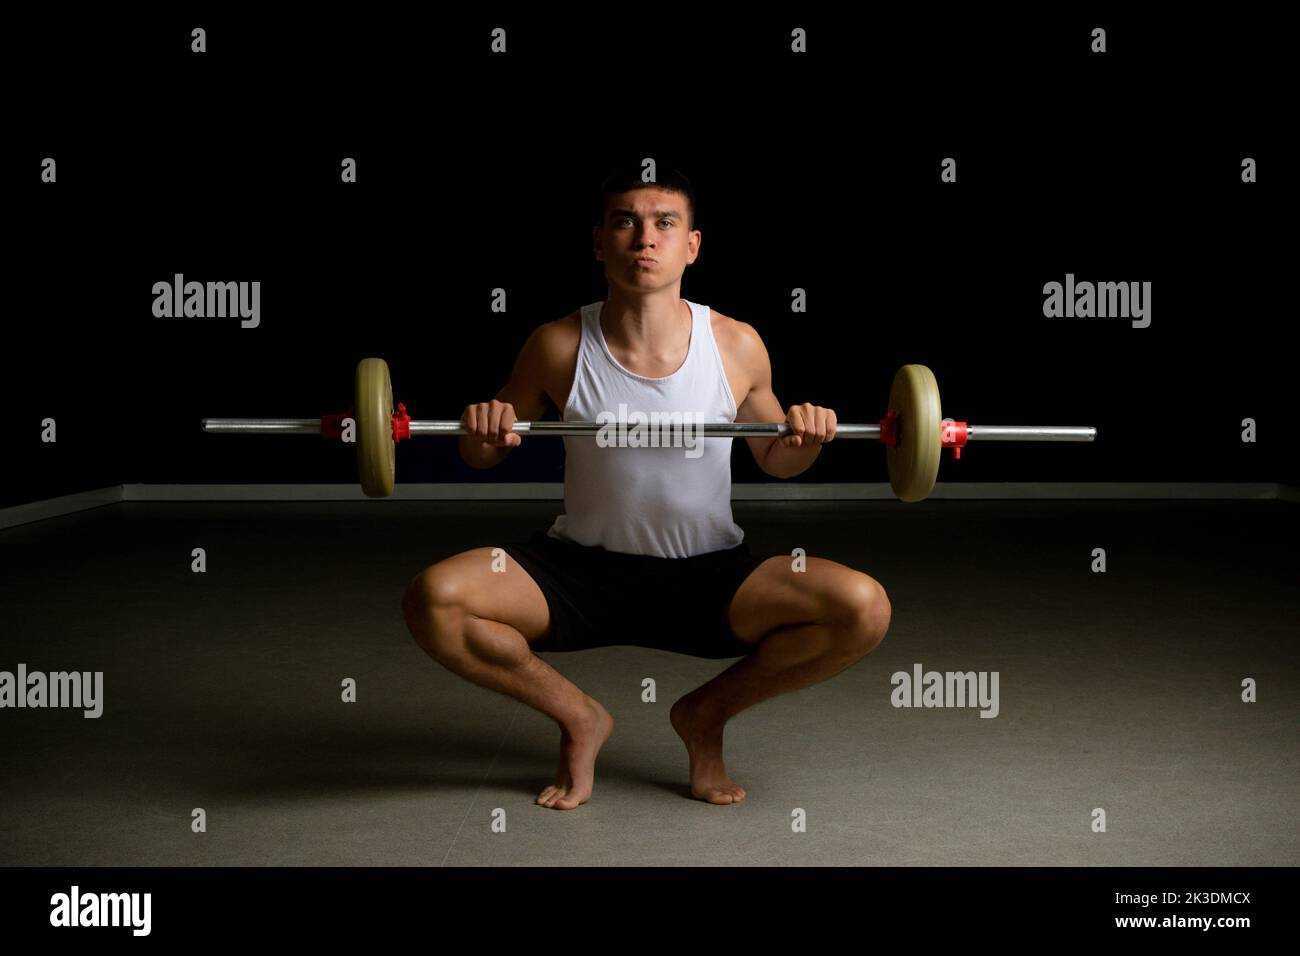 19 year old teenage boy in a tanktop lifting a barbell Stock Photo